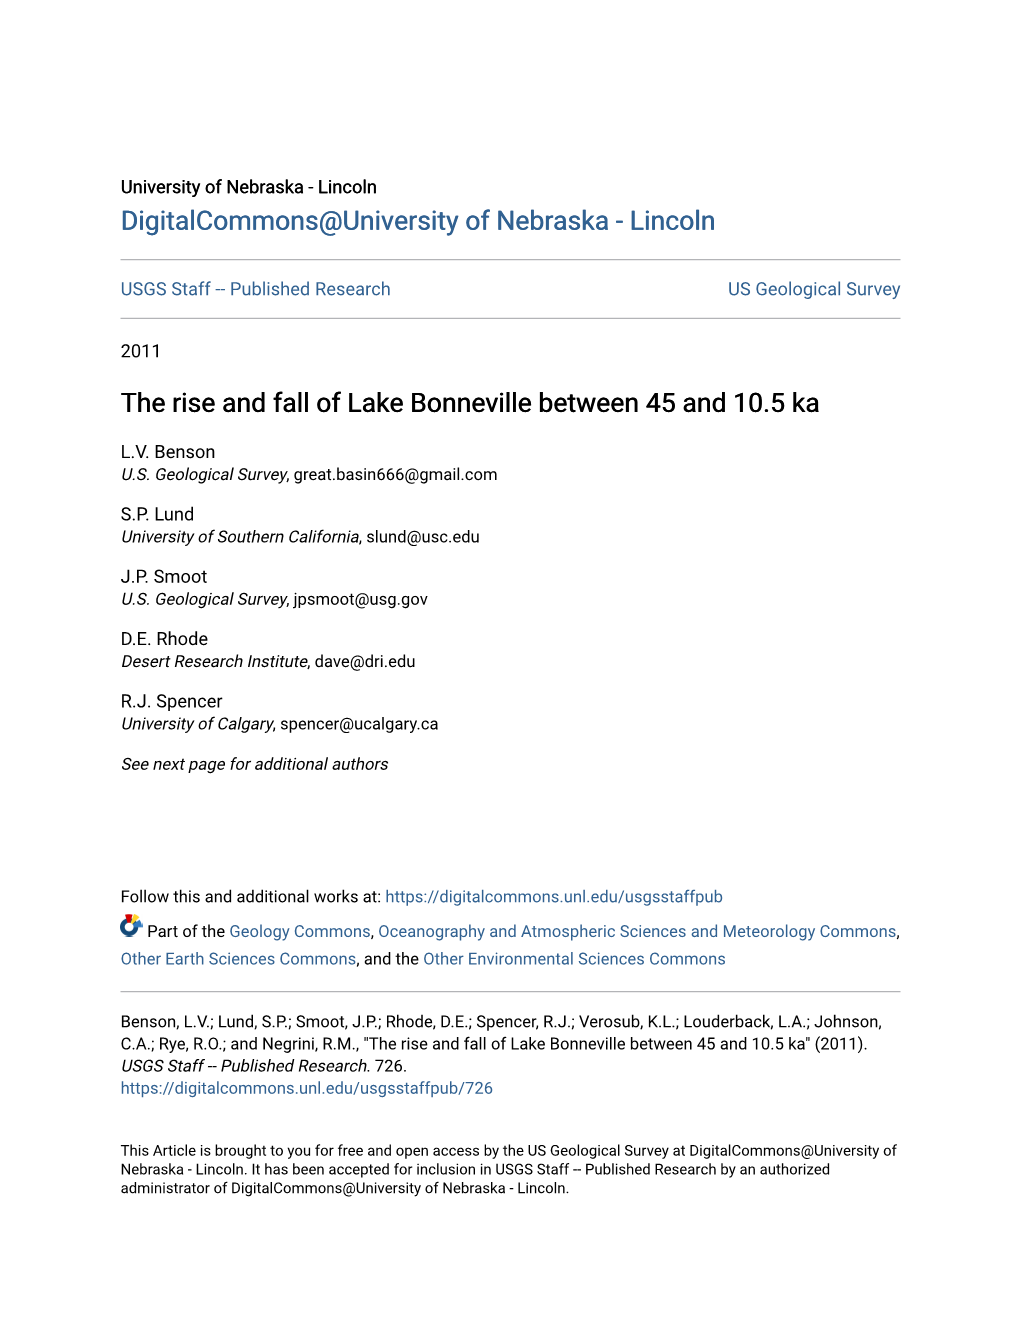 The Rise and Fall of Lake Bonneville Between 45 and 10.5 Ka